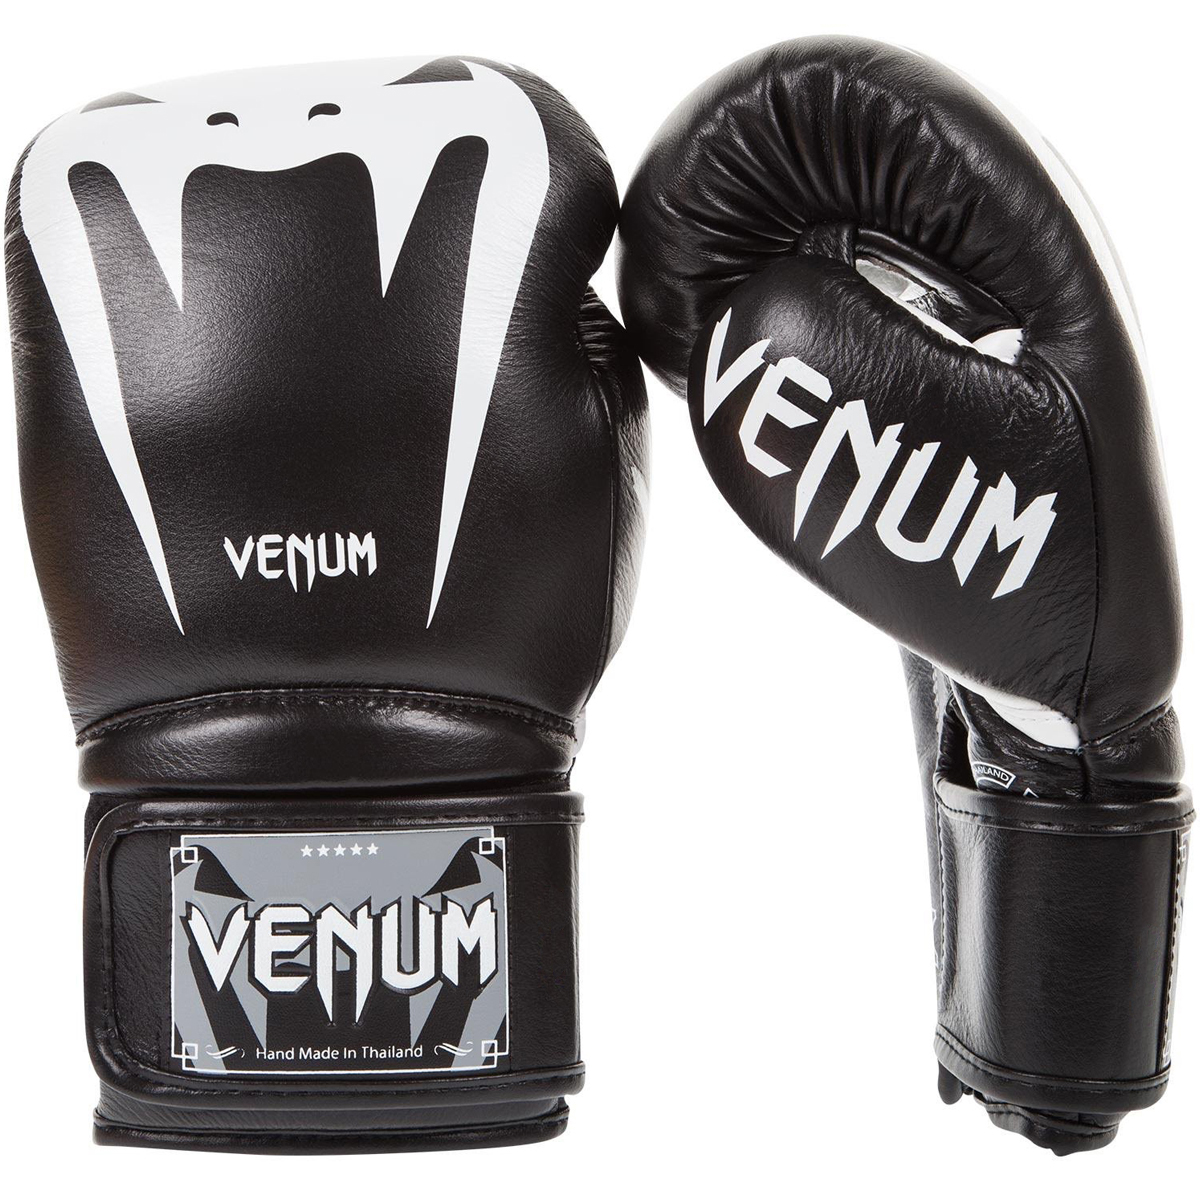 Venum Giant 3.0 Nappa Leather Hook and Loop Boxing Gloves - 12 oz. - Black/White - image 2 of 5